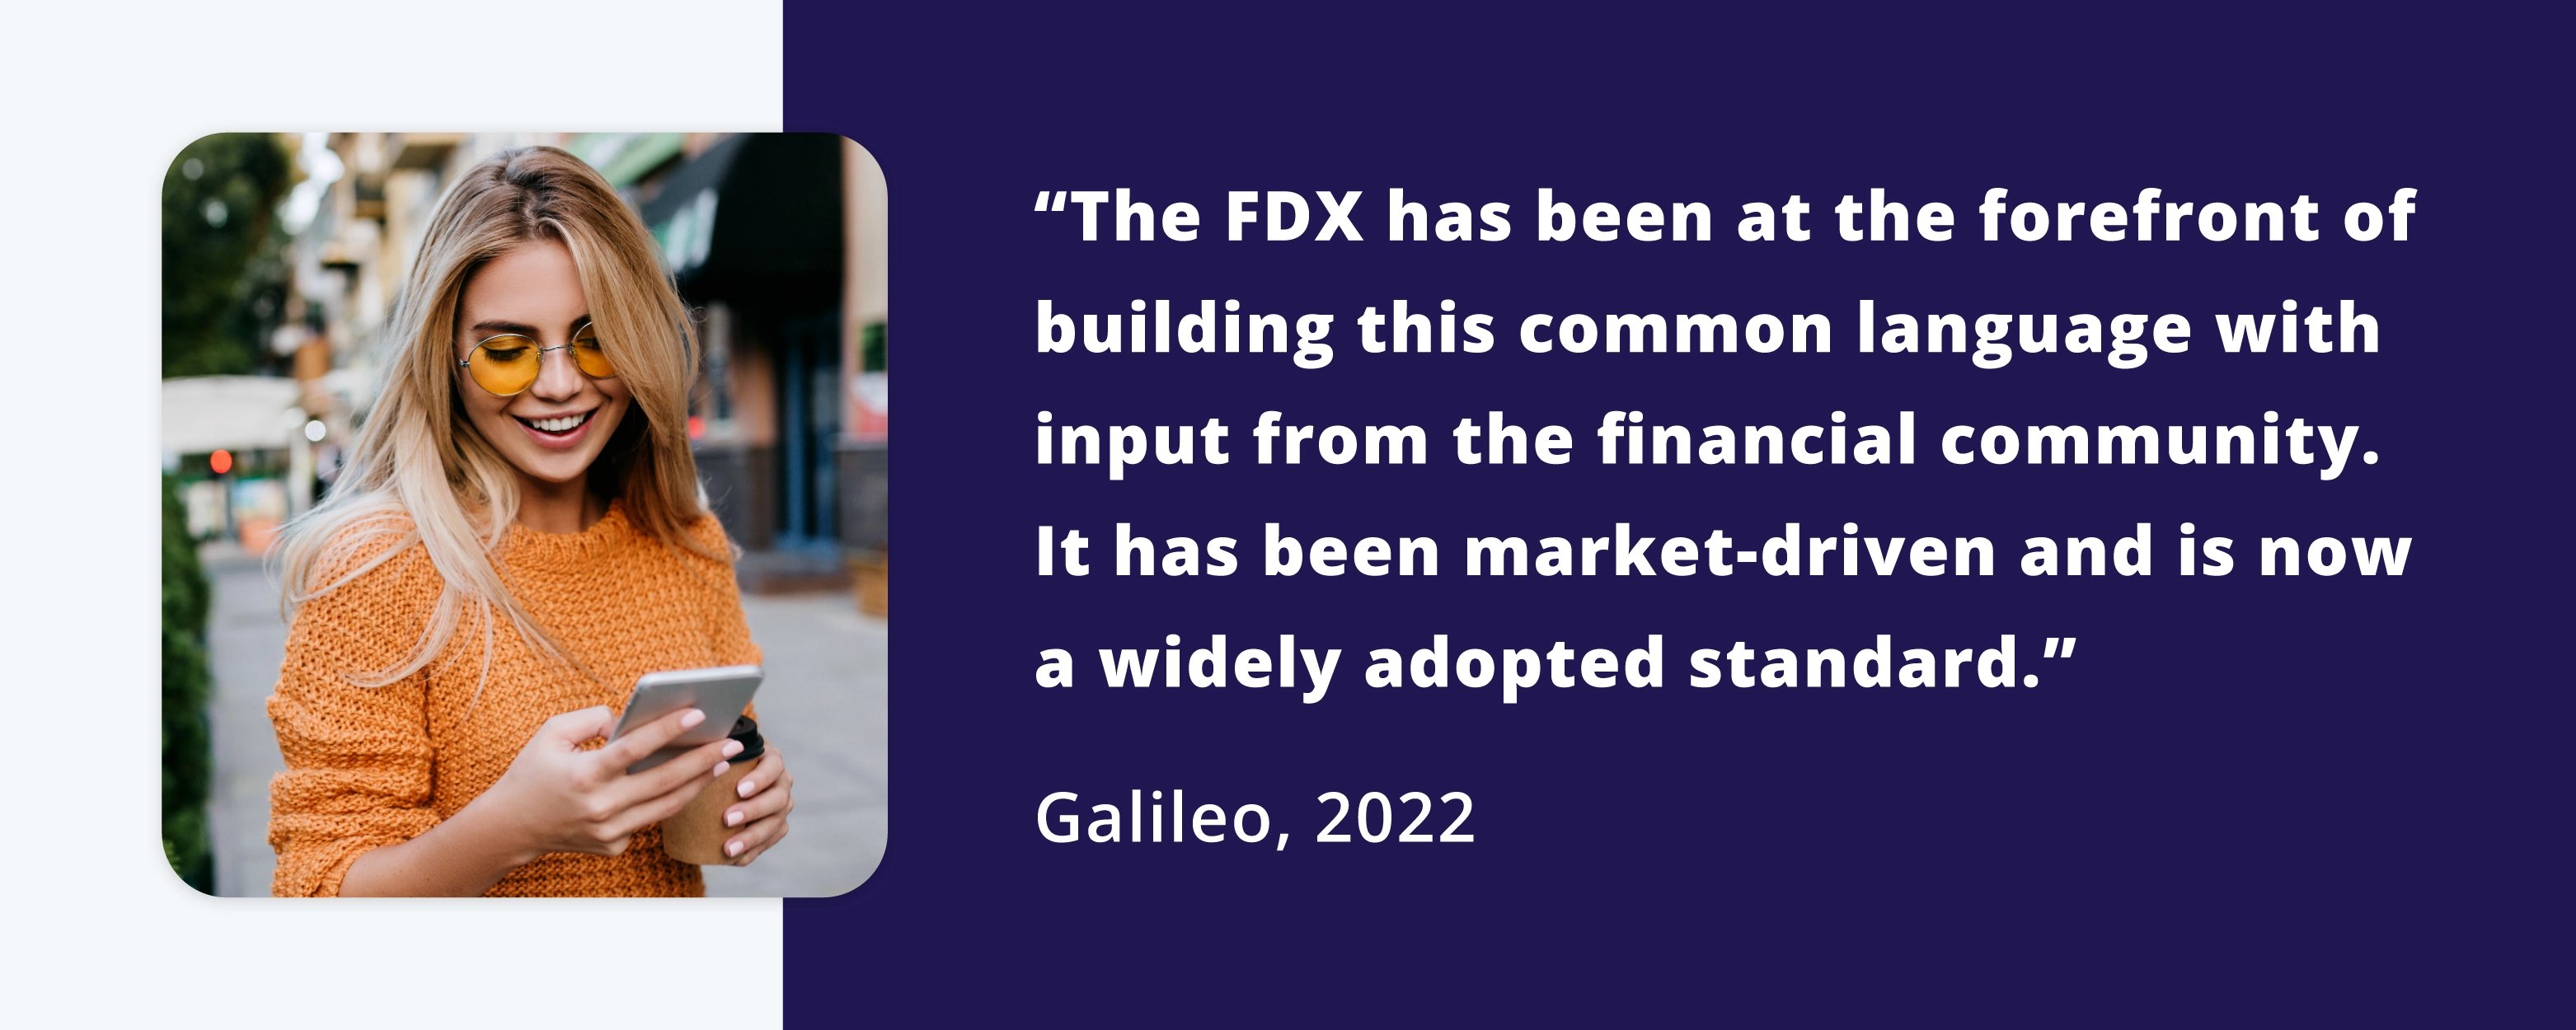 Open banking in north America, the FDX leader in open banking